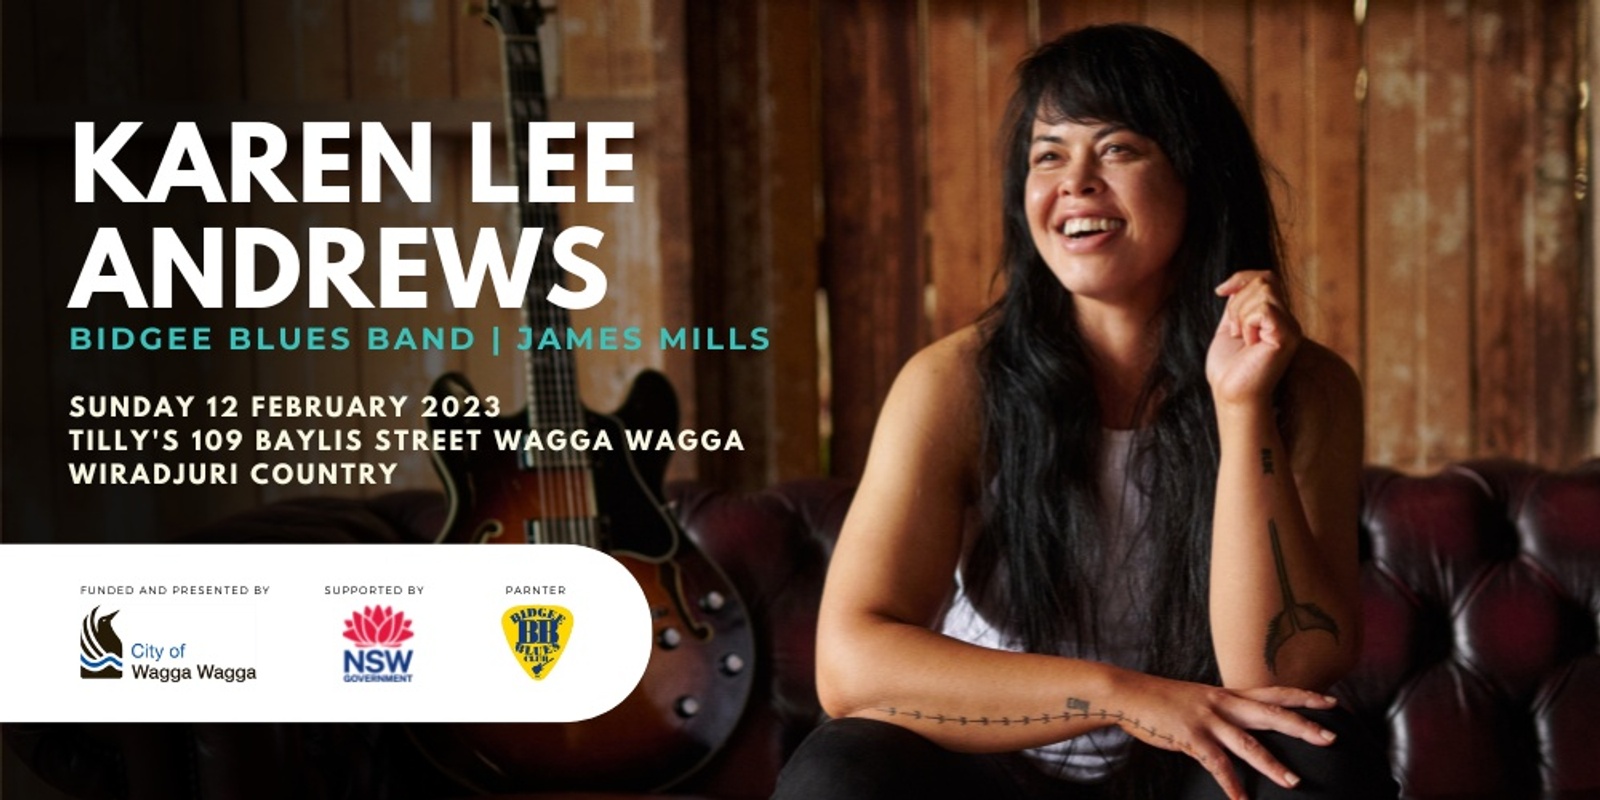 Banner image for KAREN LEE ANDREWS in WAGGA WAGGA